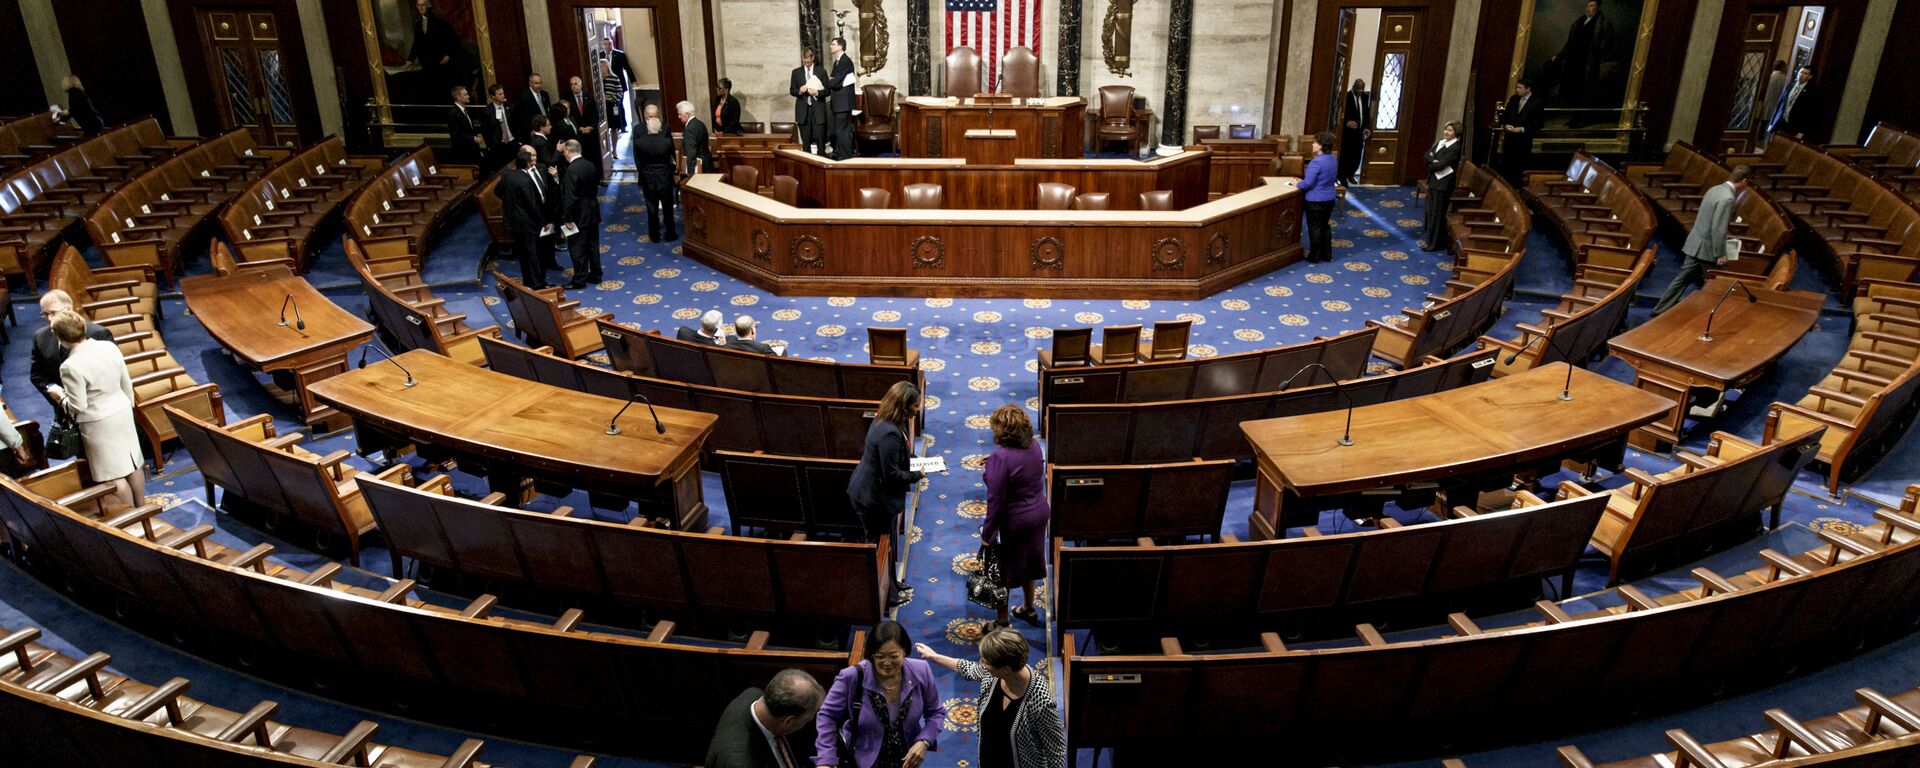 The chamber of the House of Representatives empties following a joint meeting of Congress, at the Capitol in Washington, Thursday, Sept. 18, 2014, with visiting Ukranian President Petro Poroshenko. The House and Senate are wrapping up business and heading to their home states for the weeks leading up to the midterm elections - Sputnik International, 1920, 26.10.2022